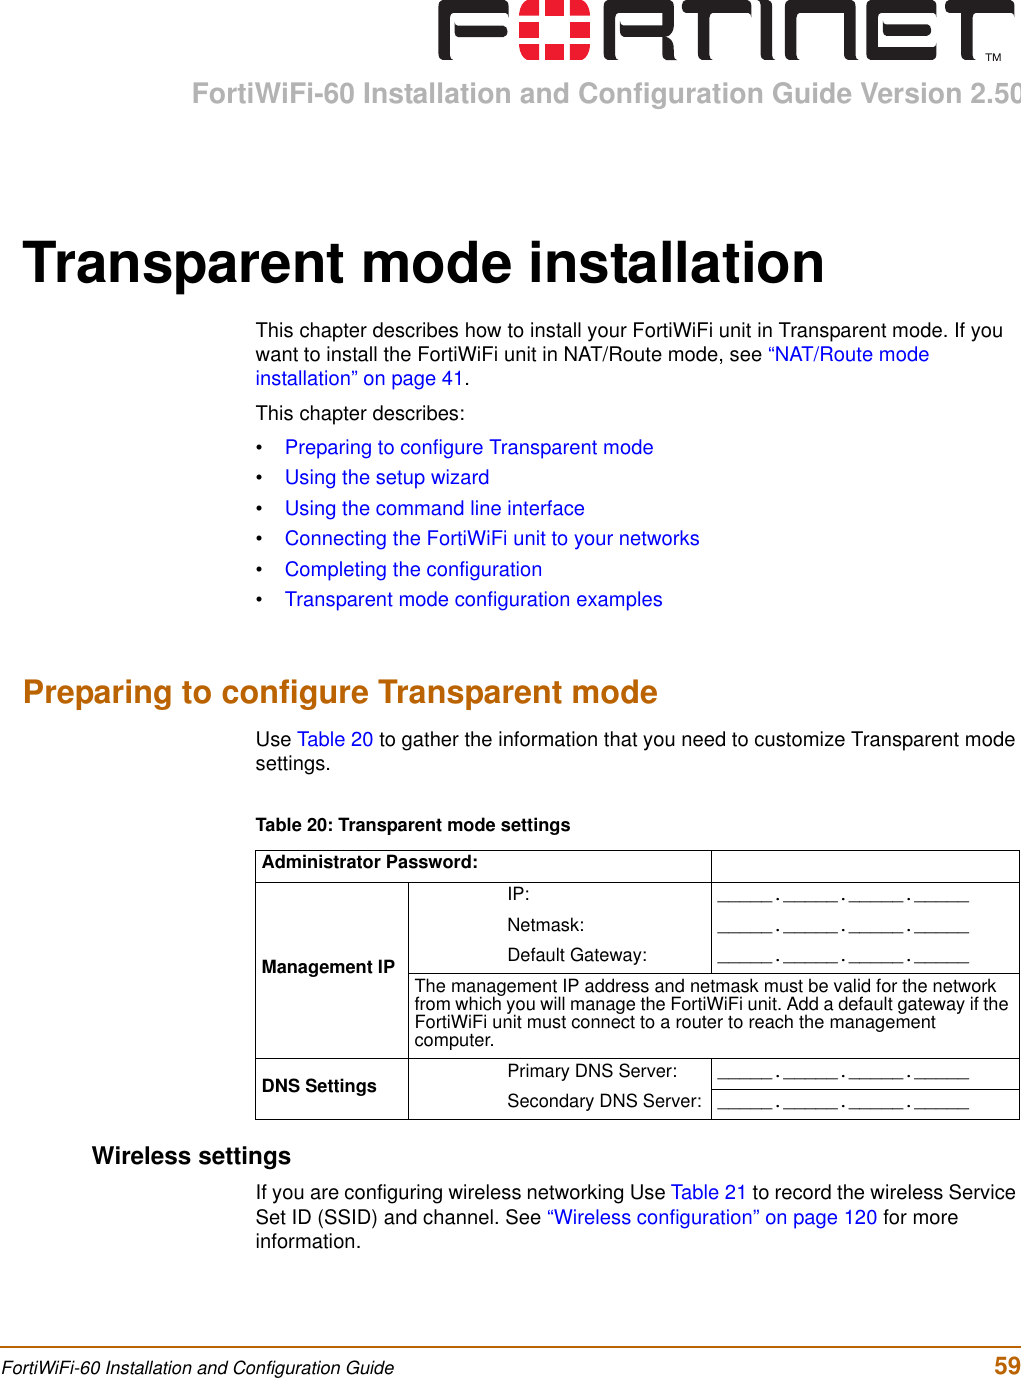 FortiWiFi-60 Installation and Configuration Guide Version 2.50FortiWiFi-60 Installation and Configuration Guide  59Transparent mode installationThis chapter describes how to install your FortiWiFi unit in Transparent mode. If you want to install the FortiWiFi unit in NAT/Route mode, see “NAT/Route mode installation” on page 41.This chapter describes:•Preparing to configure Transparent mode•Using the setup wizard•Using the command line interface•Connecting the FortiWiFi unit to your networks•Completing the configuration•Transparent mode configuration examplesPreparing to configure Transparent modeUse Table 20 to gather the information that you need to customize Transparent mode settings.Wireless settingsIf you are configuring wireless networking Use Table 21 to record the wireless Service Set ID (SSID) and channel. See “Wireless configuration” on page 120 for more information.Table 20: Transparent mode settingsAdministrator Password:Management IPIP: _____._____._____._____Netmask: _____._____._____._____Default Gateway: _____._____._____._____The management IP address and netmask must be valid for the network from which you will manage the FortiWiFi unit. Add a default gateway if the FortiWiFi unit must connect to a router to reach the management computer.DNS Settings Primary DNS Server: _____._____._____._____Secondary DNS Server: _____._____._____._____